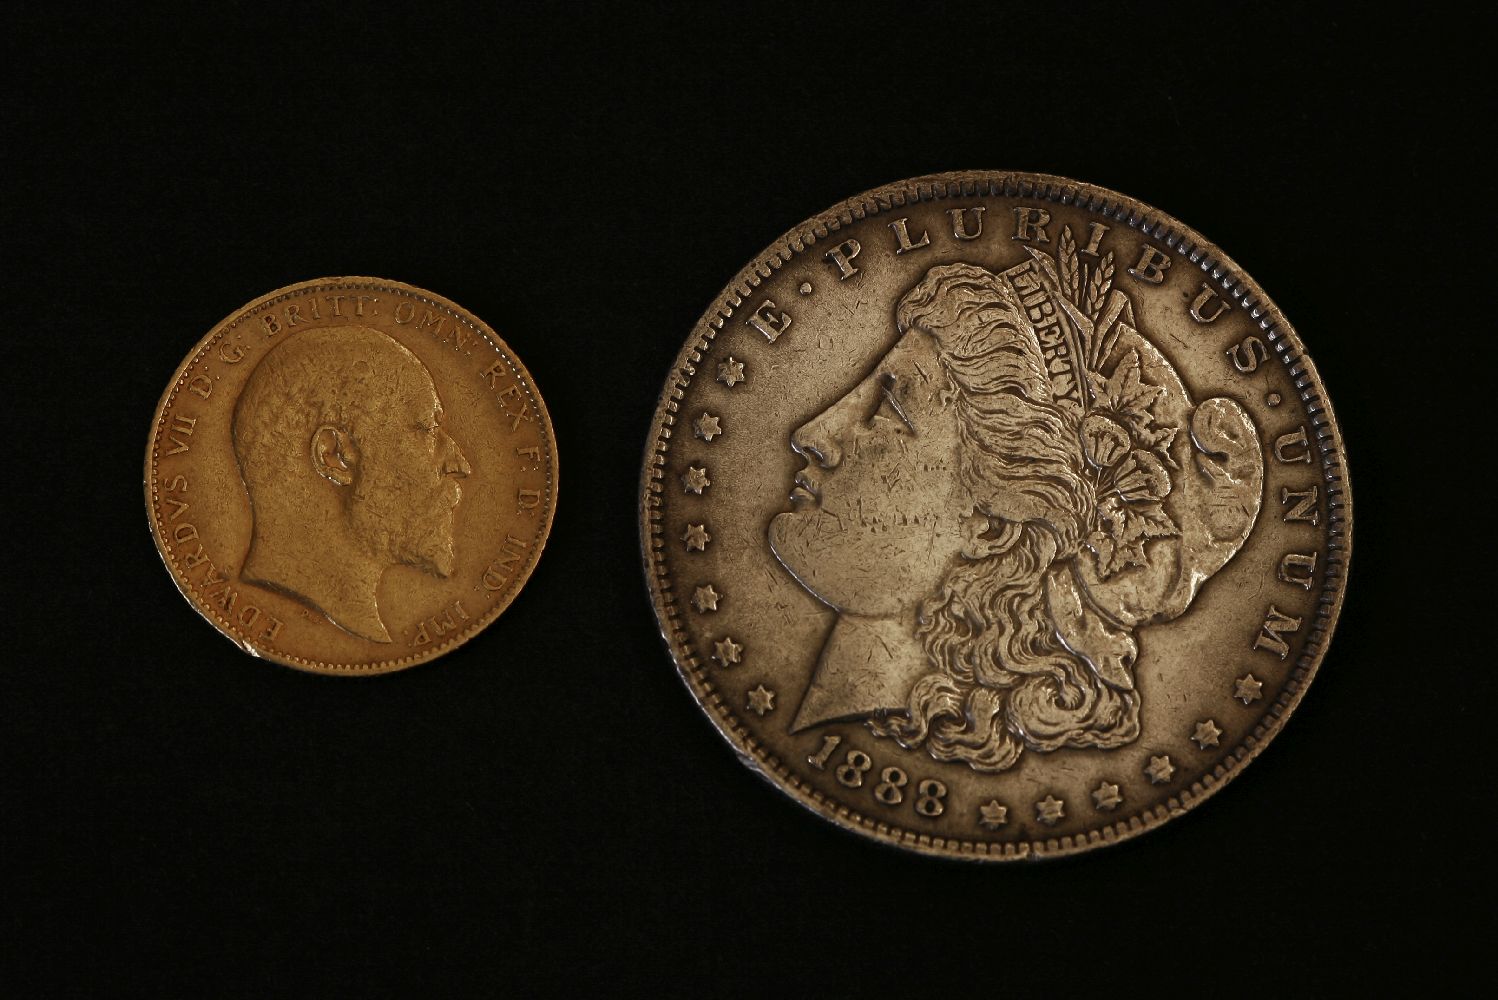 Great Britain and World, an Edward VII Sovereign, 1903, together with an 1888 United States Silver